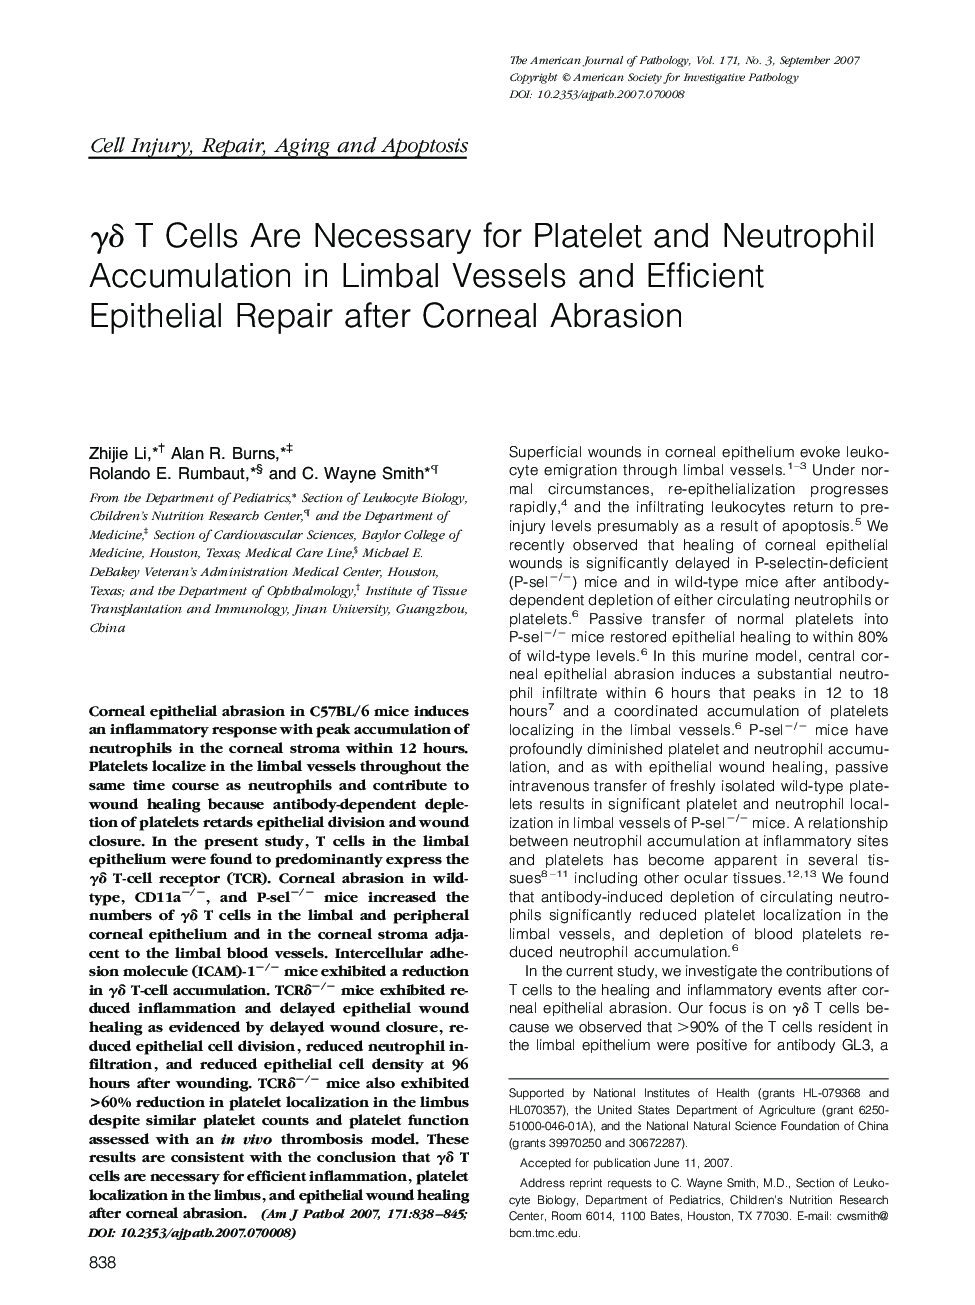 Î³Î´ T Cells Are Necessary for Platelet and Neutrophil Accumulation in Limbal Vessels and Efficient Epithelial Repair after Corneal Abrasion